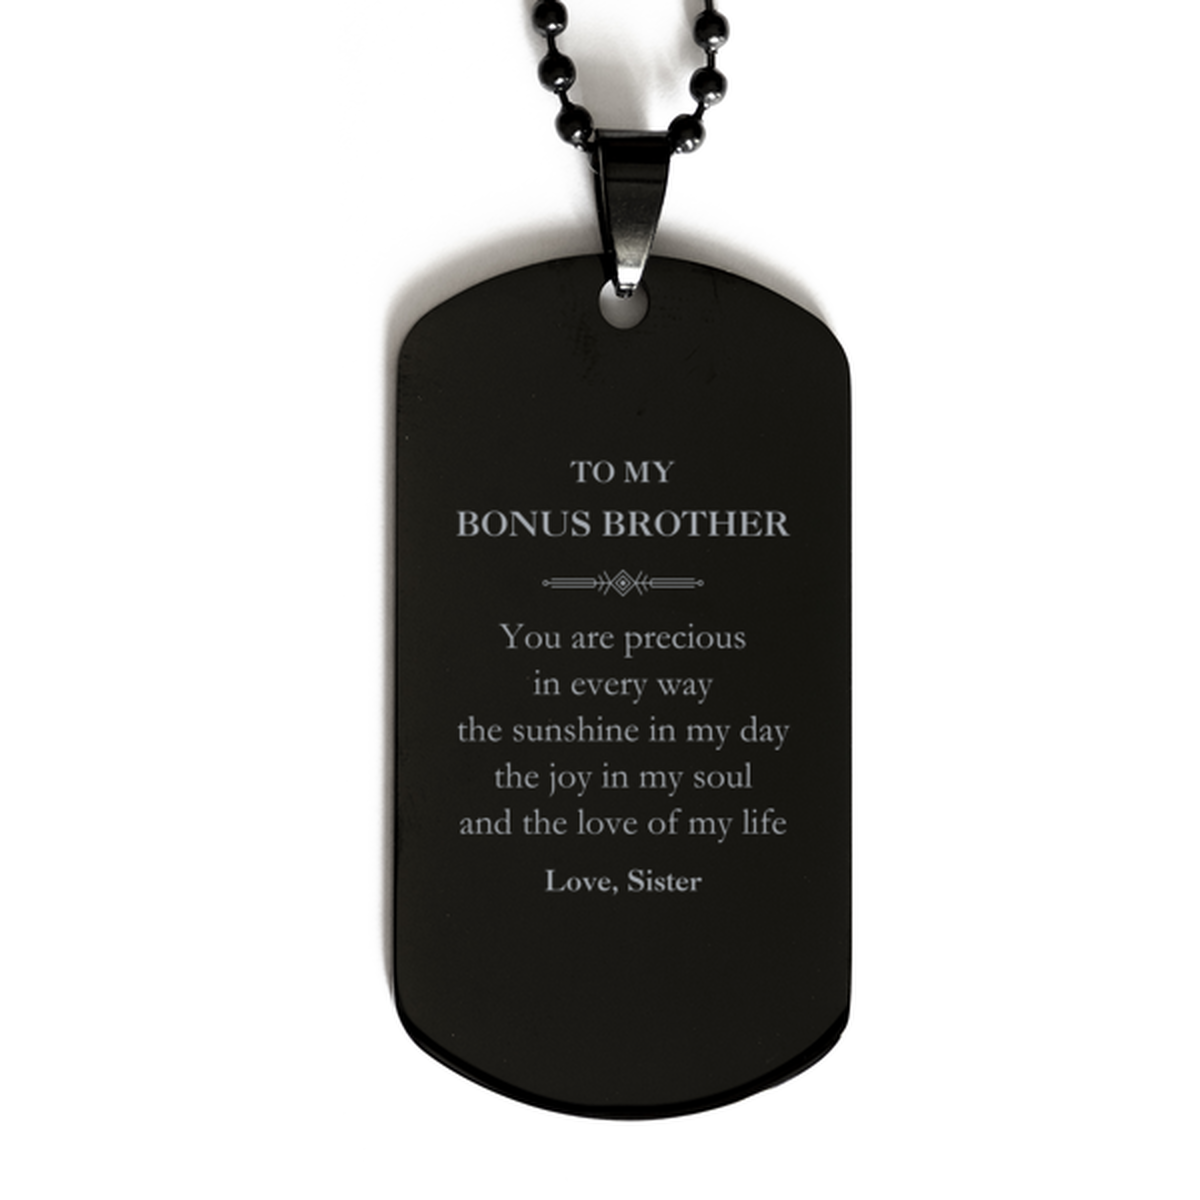 Graduation Gifts for Bonus Brother Black Dog Tag Present from Sister, Christmas Bonus Brother Birthday Gifts Bonus Brother You are precious in every way the sunshine in my day. Love, Sister